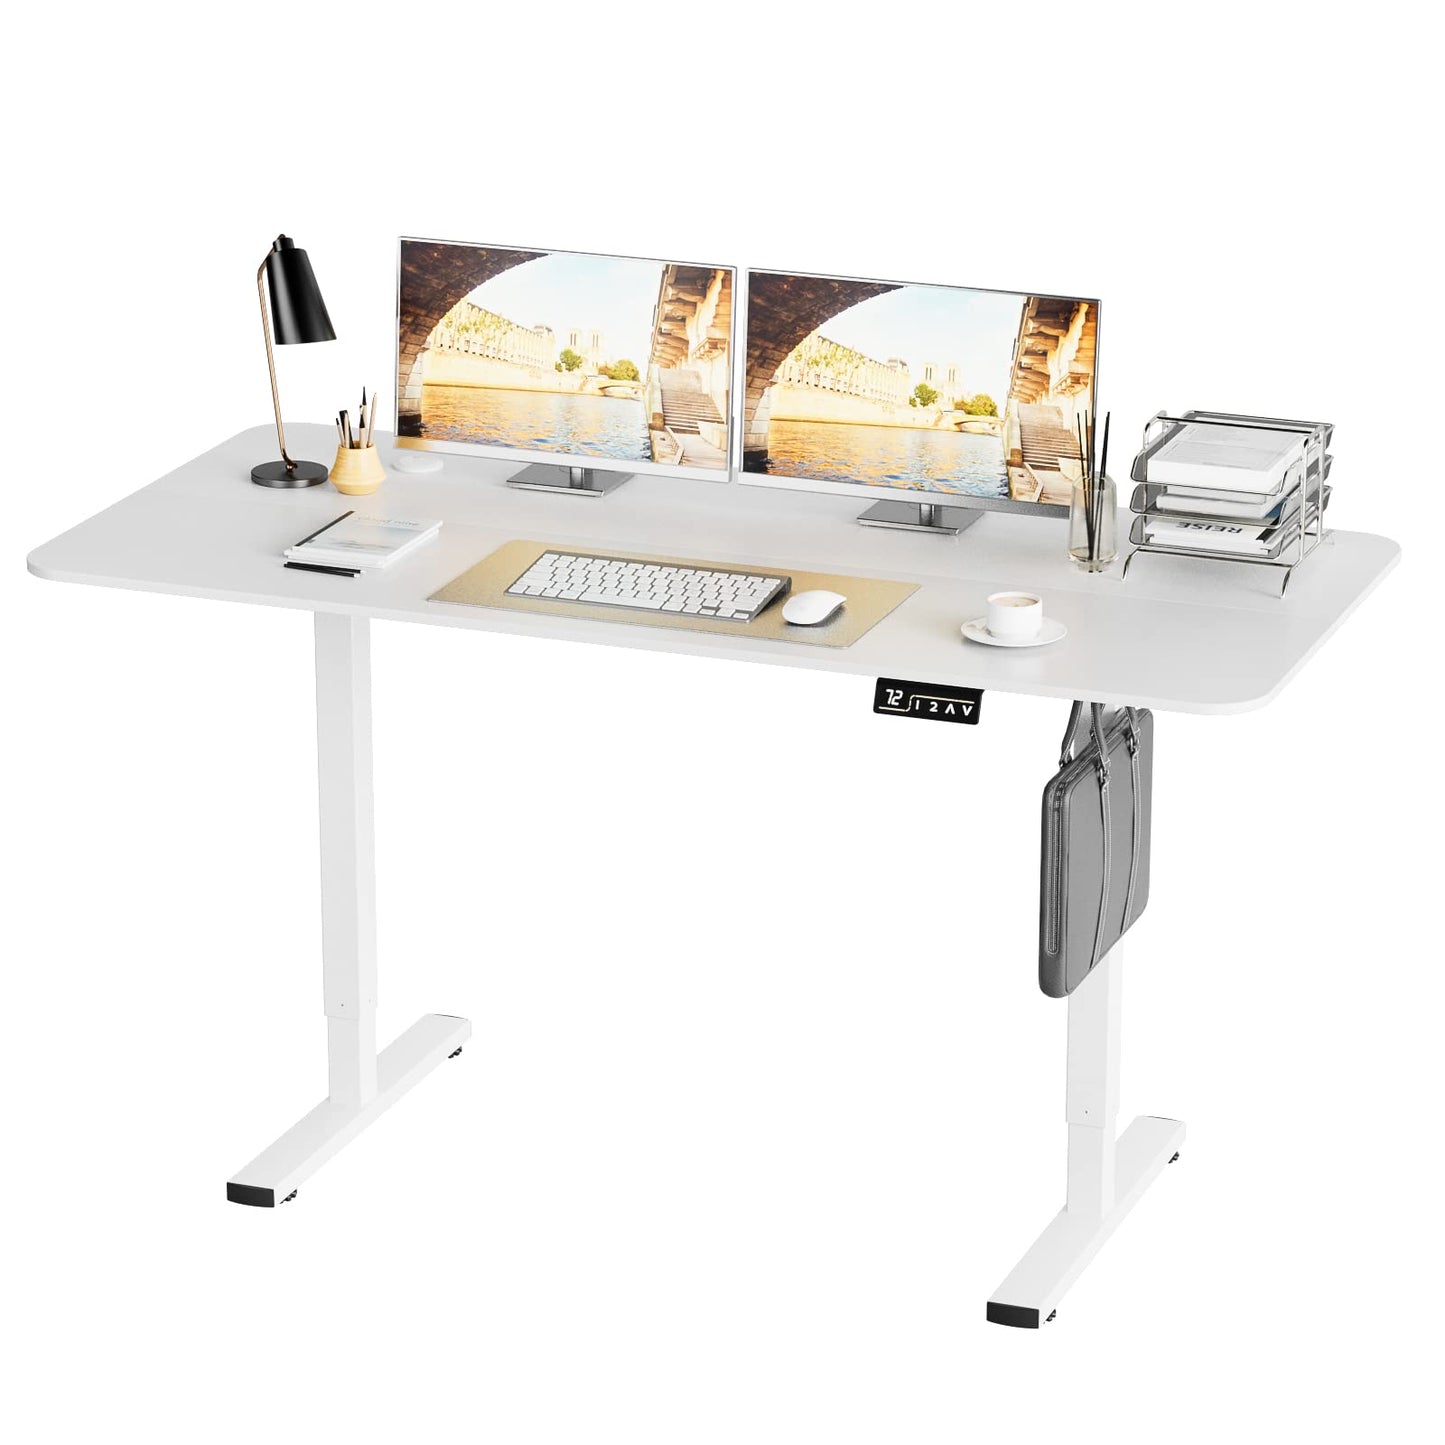 Furniwell Electric Height Adjustable Standing Desk Large Sit Stand up Desk Home Office Computer Desk 55 x 24 Inches Lift Table with T-Shaped Metal